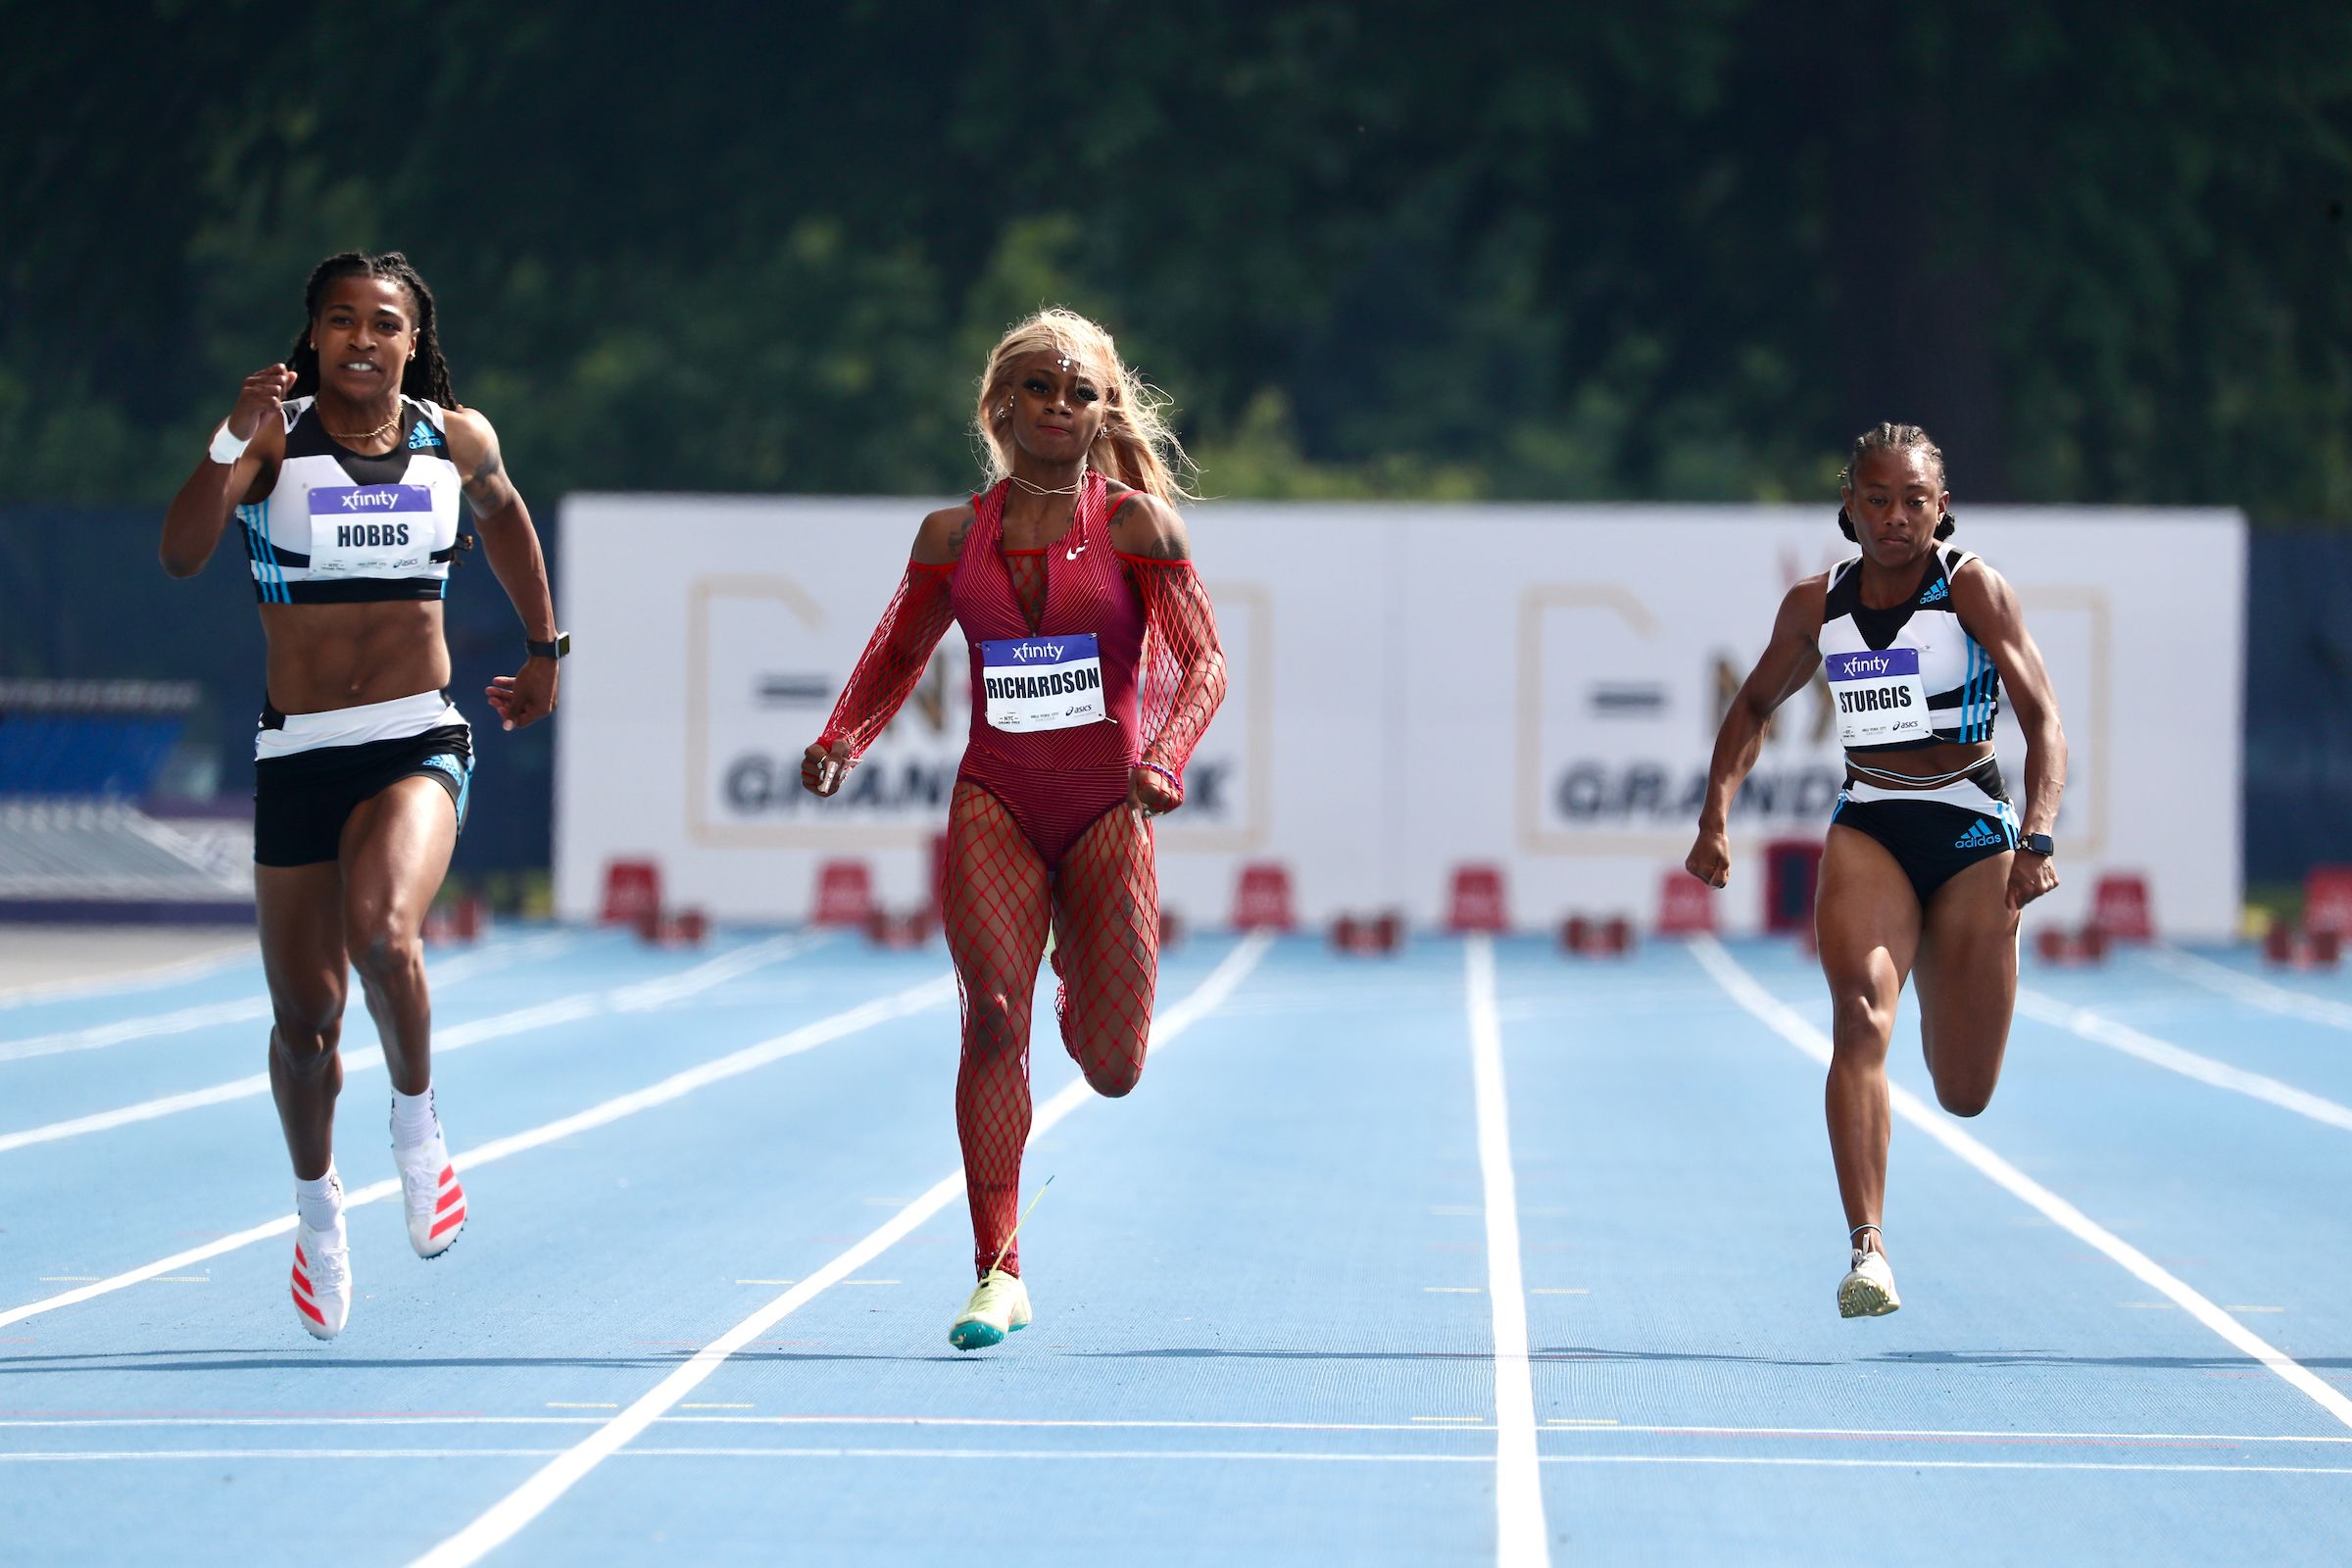 Winner Aleia Hobbs, Sha'Carri Richardson and Cambrea Sturgis in the 100m at the New York Grand Prix